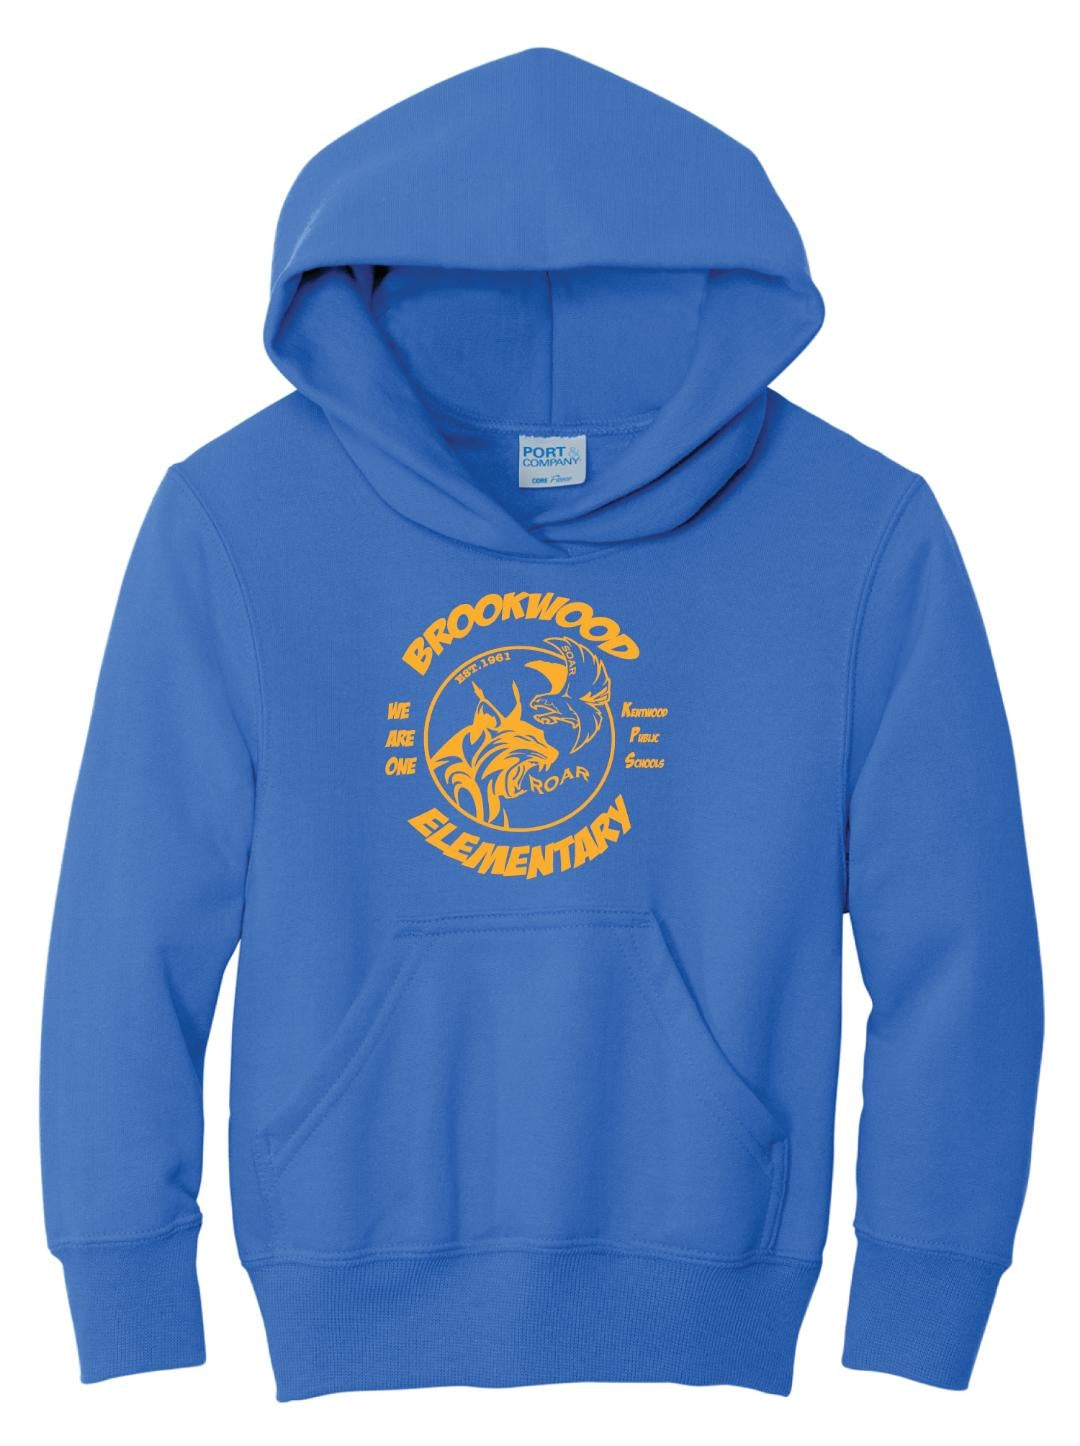 Brookwood "We Are One" YOUTH PULL OVER HOODIE